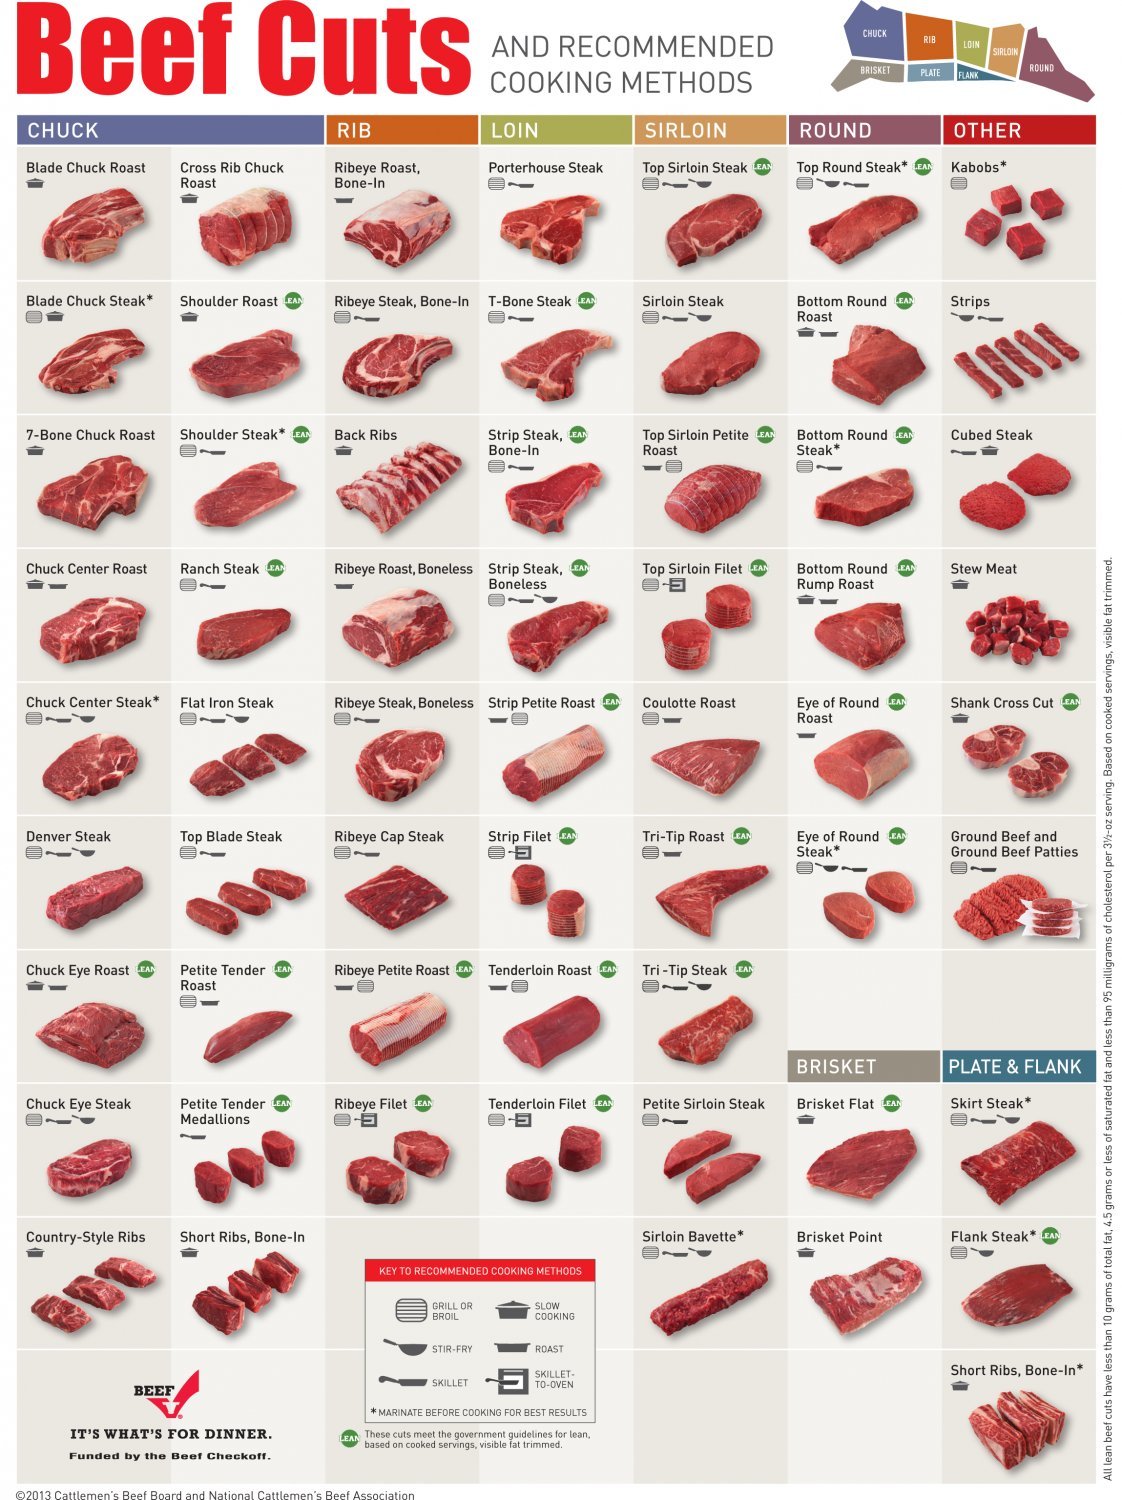 Beef Cuts Recommended Cooking Methods Chart  24"x35" (60cm/90cm) Canvas Print